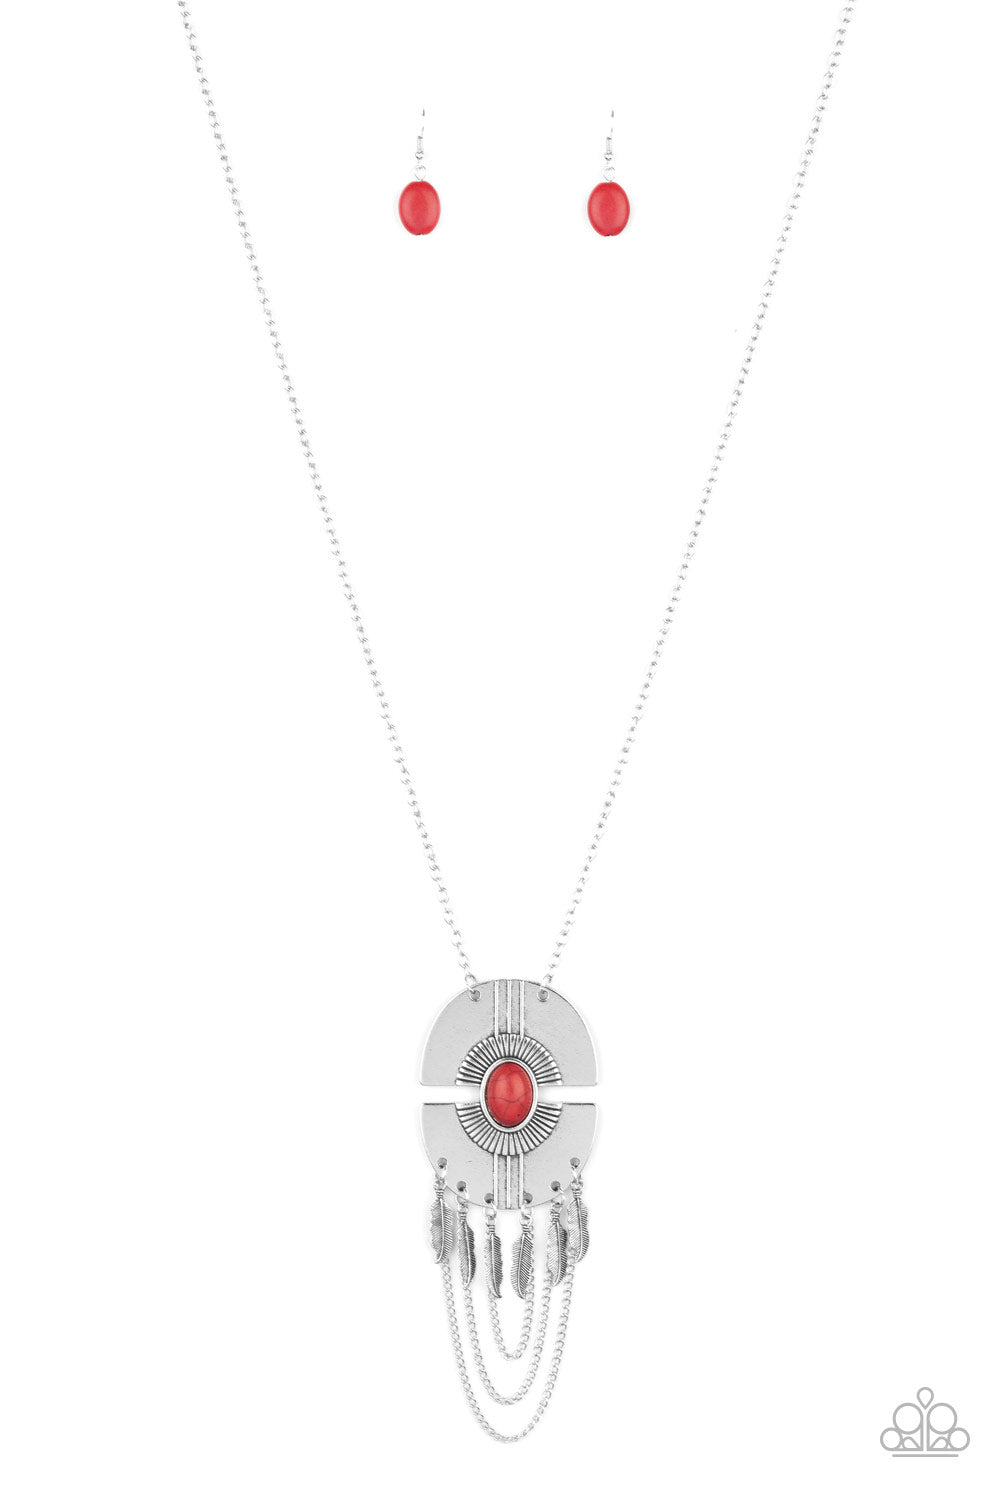 Desert Culture - Red - Bling With Crystal